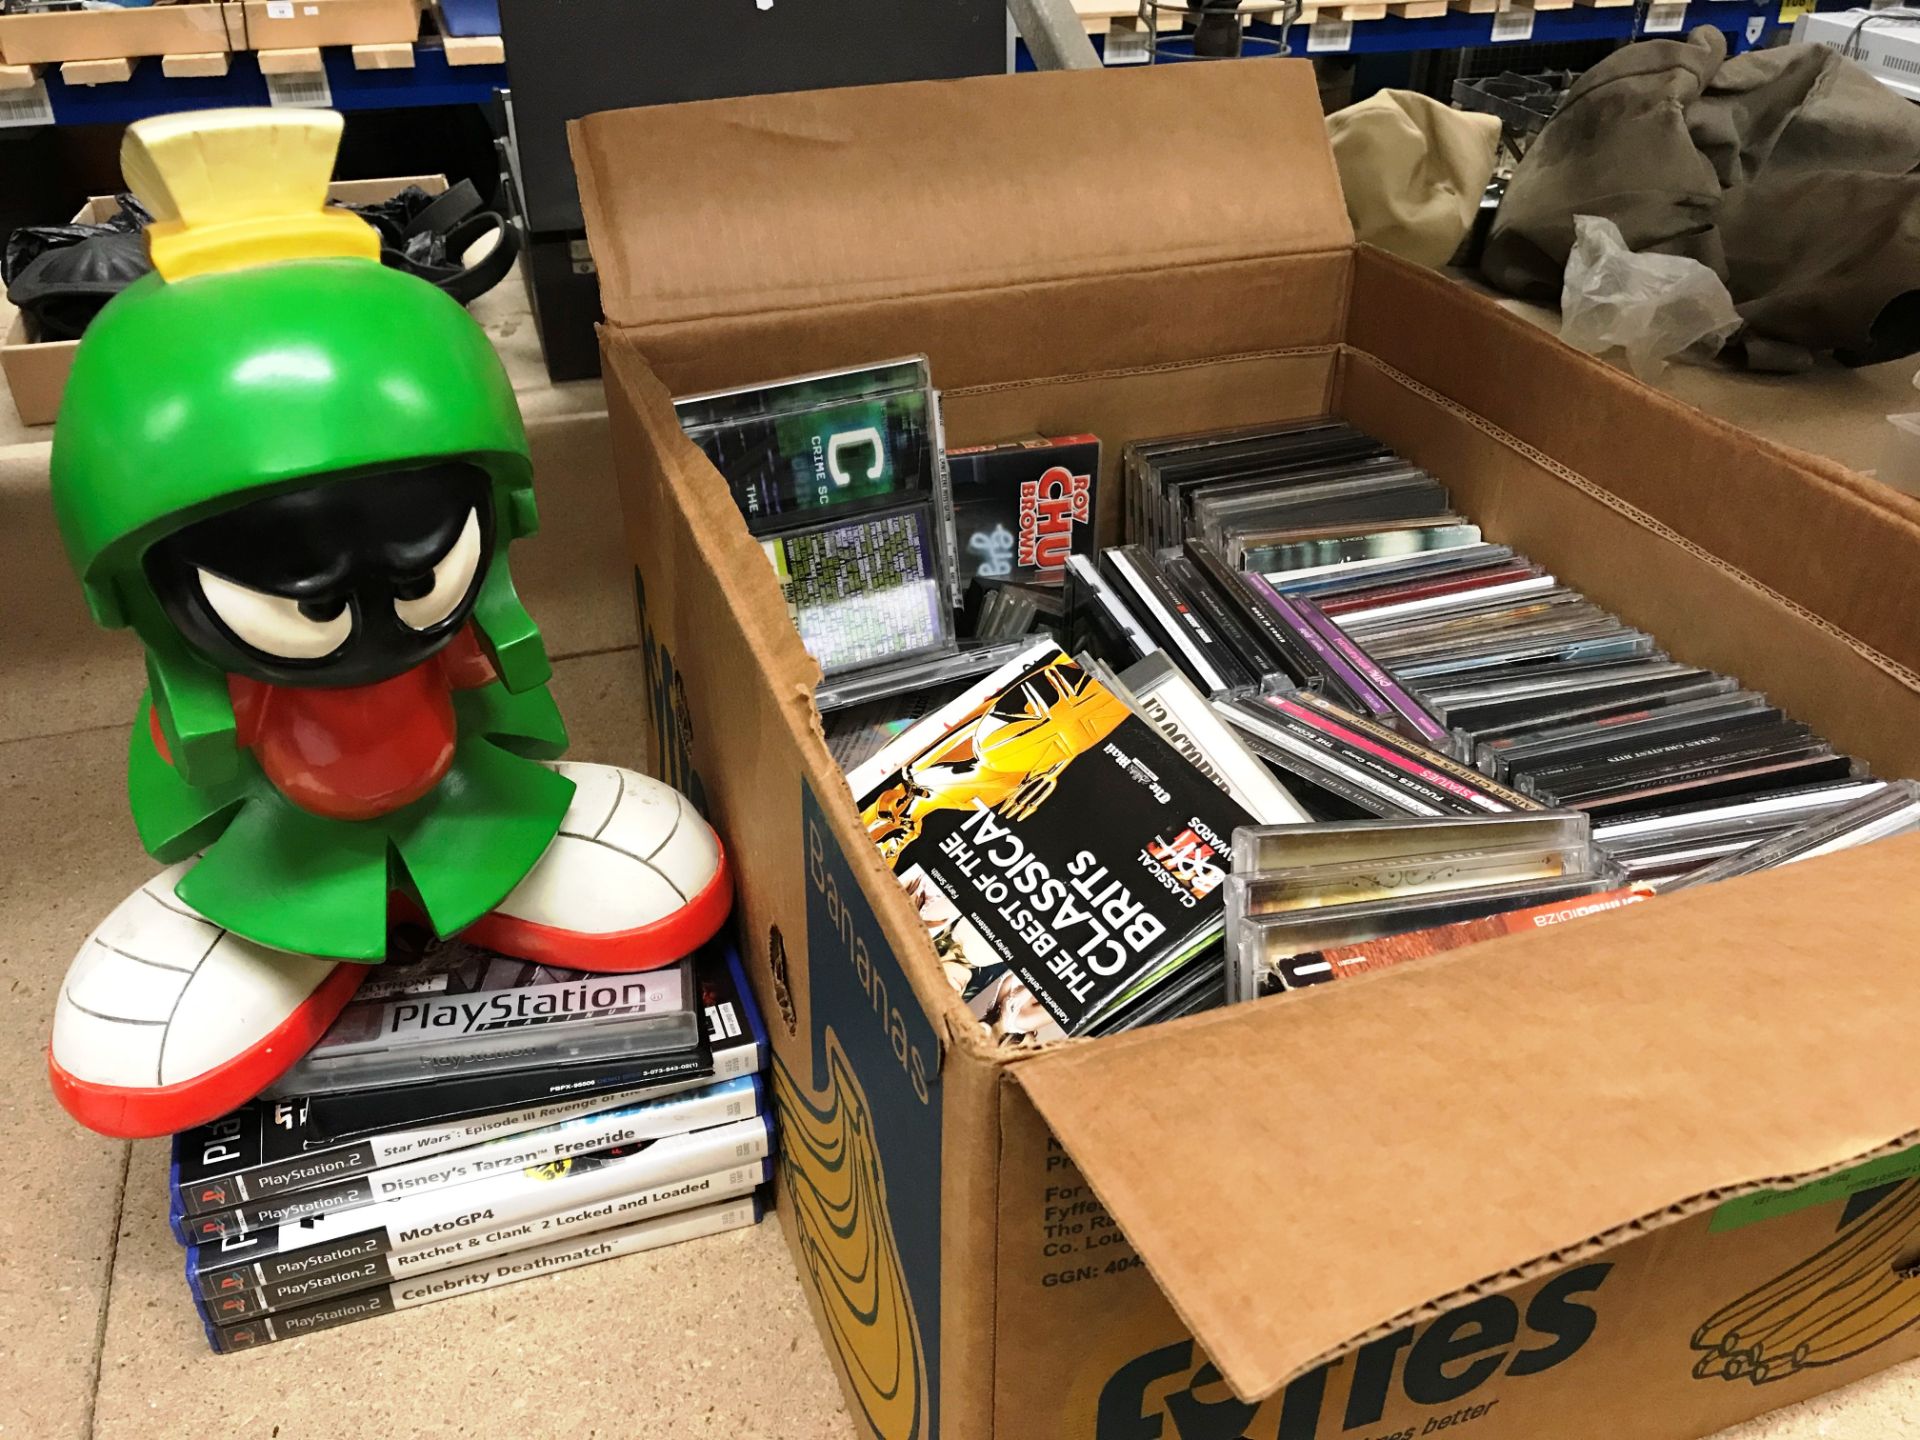 Warner Brothers model of Marvin the Martian, - Image 3 of 8